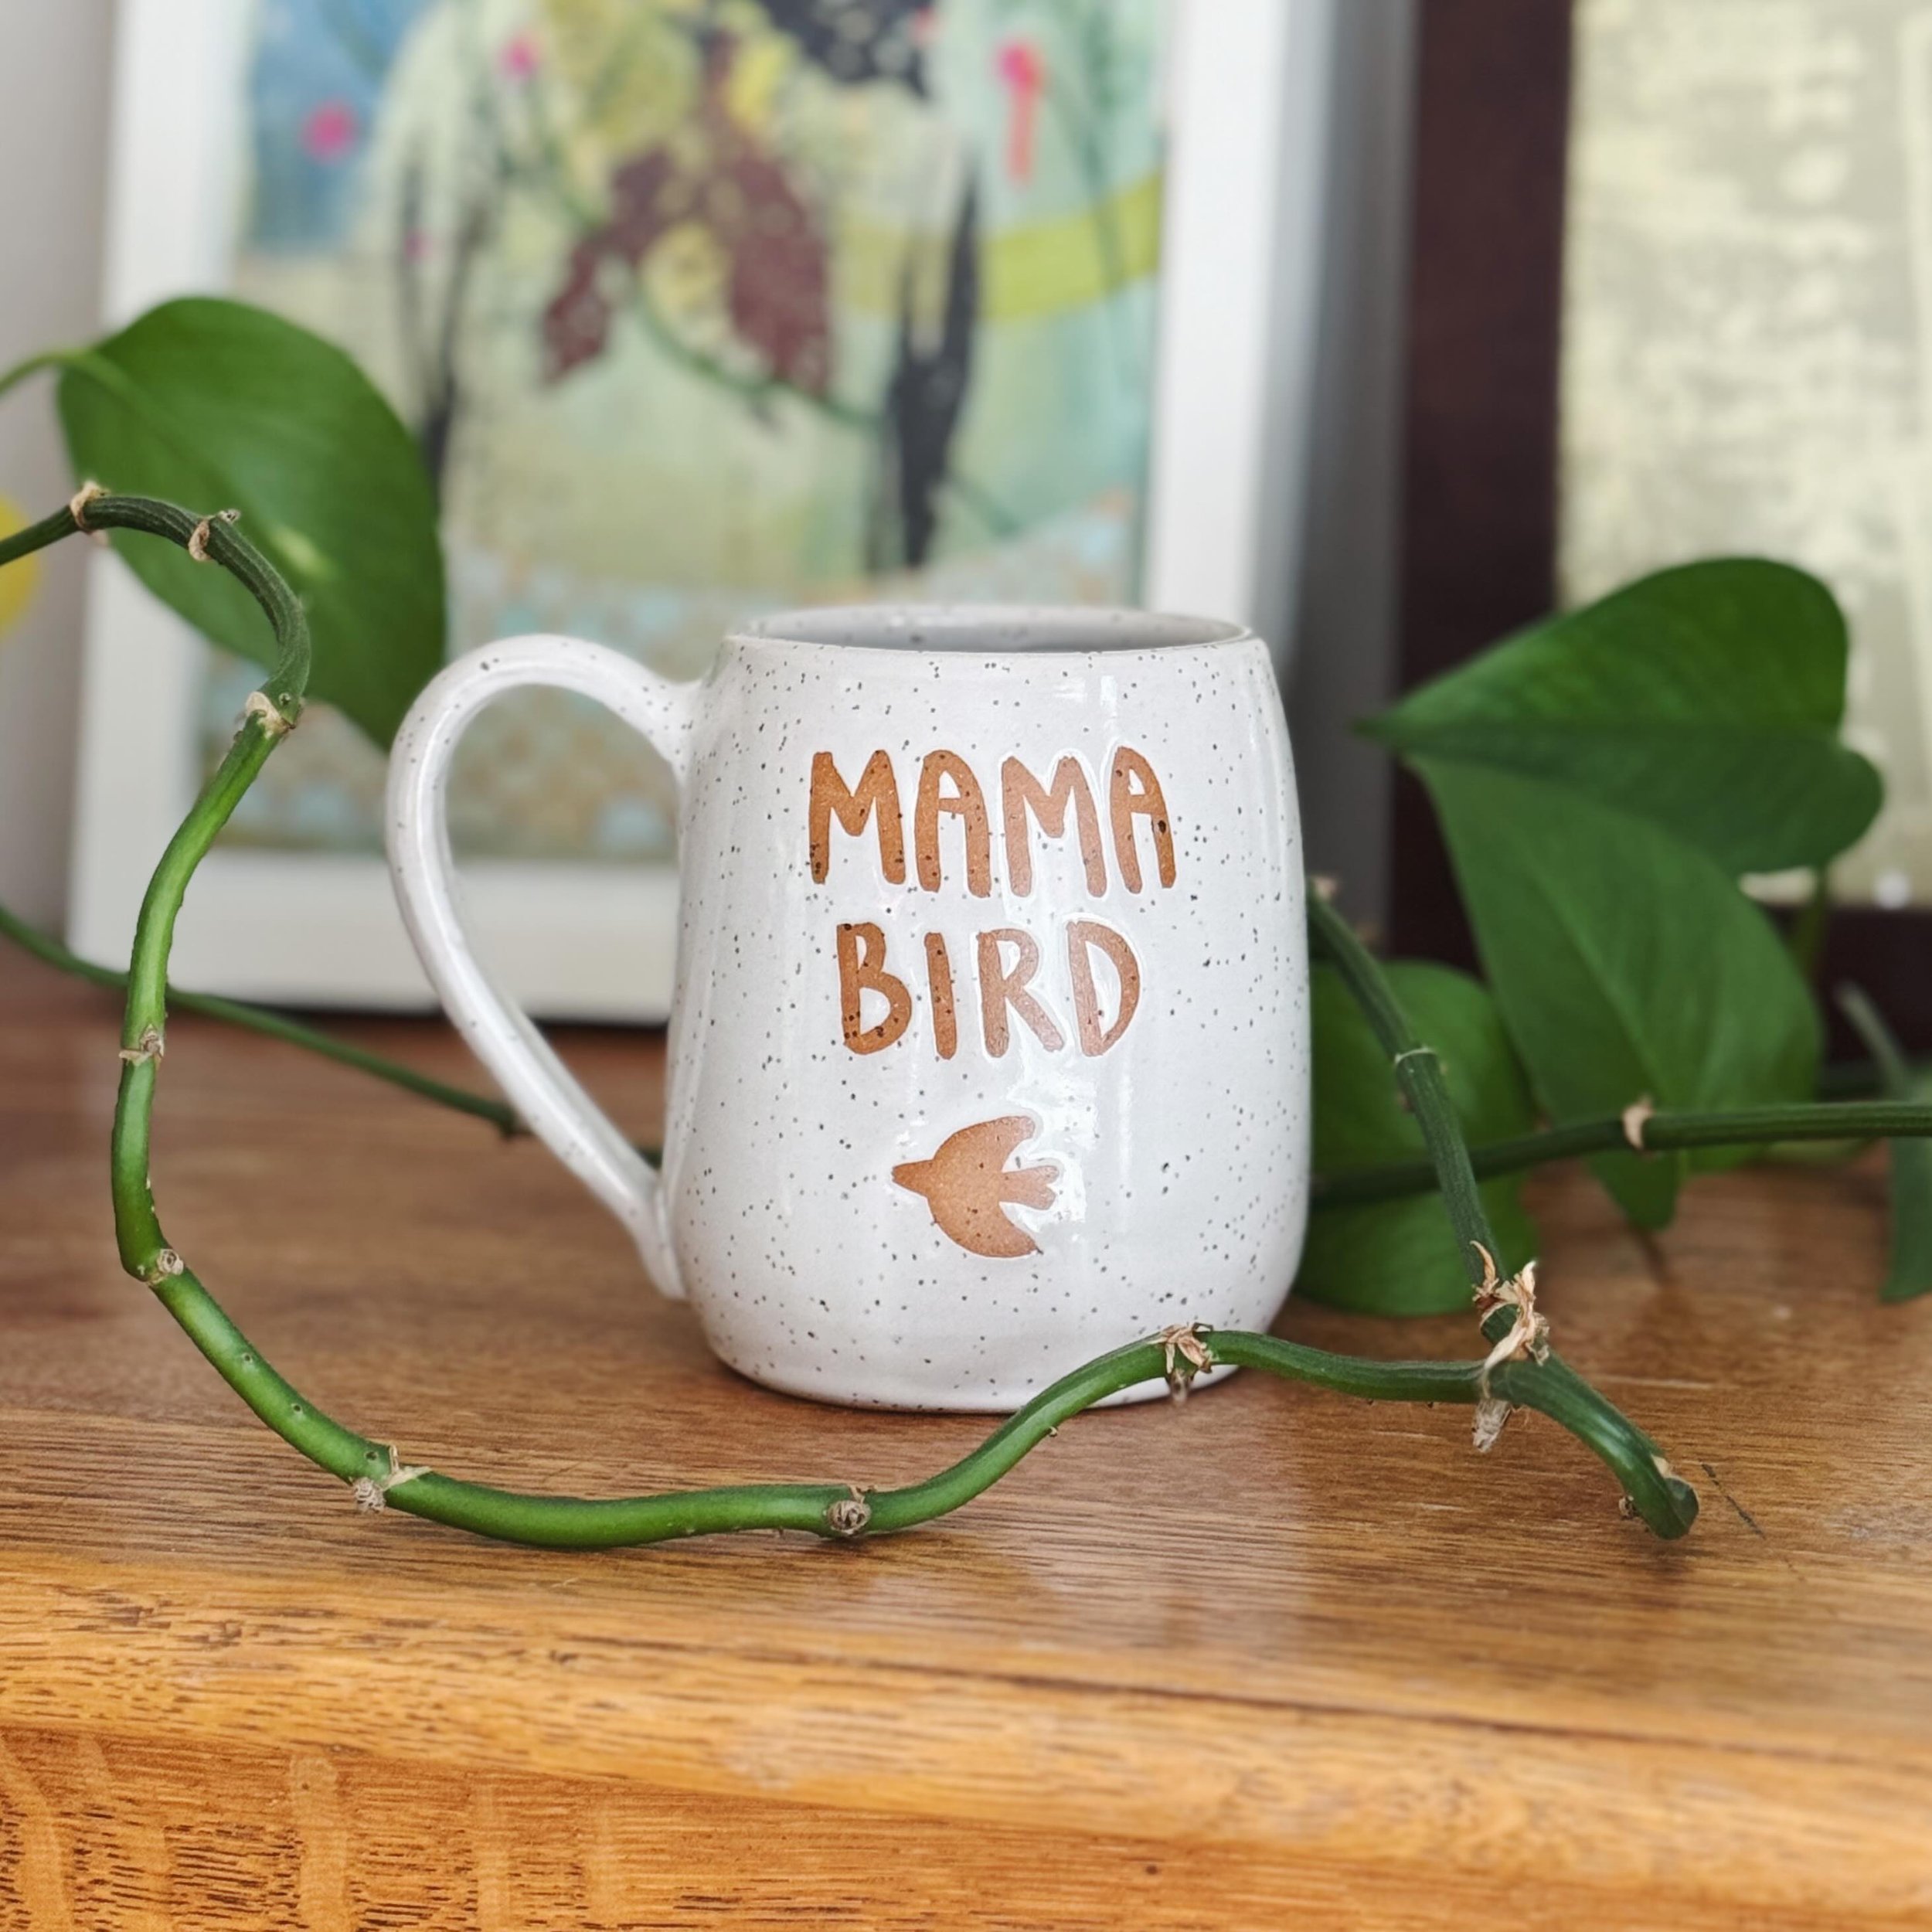 Mother&rsquo;s Day is coming right up, do the mama birds in your life need a special treat? 😉 🐦  #mothersday #pottery #ceramics #madebyhand #madisonmakers #kilnfolk #thatsdarling #mamabird #shopsmall ##makersmovement #makersgonnamake #studiopottery